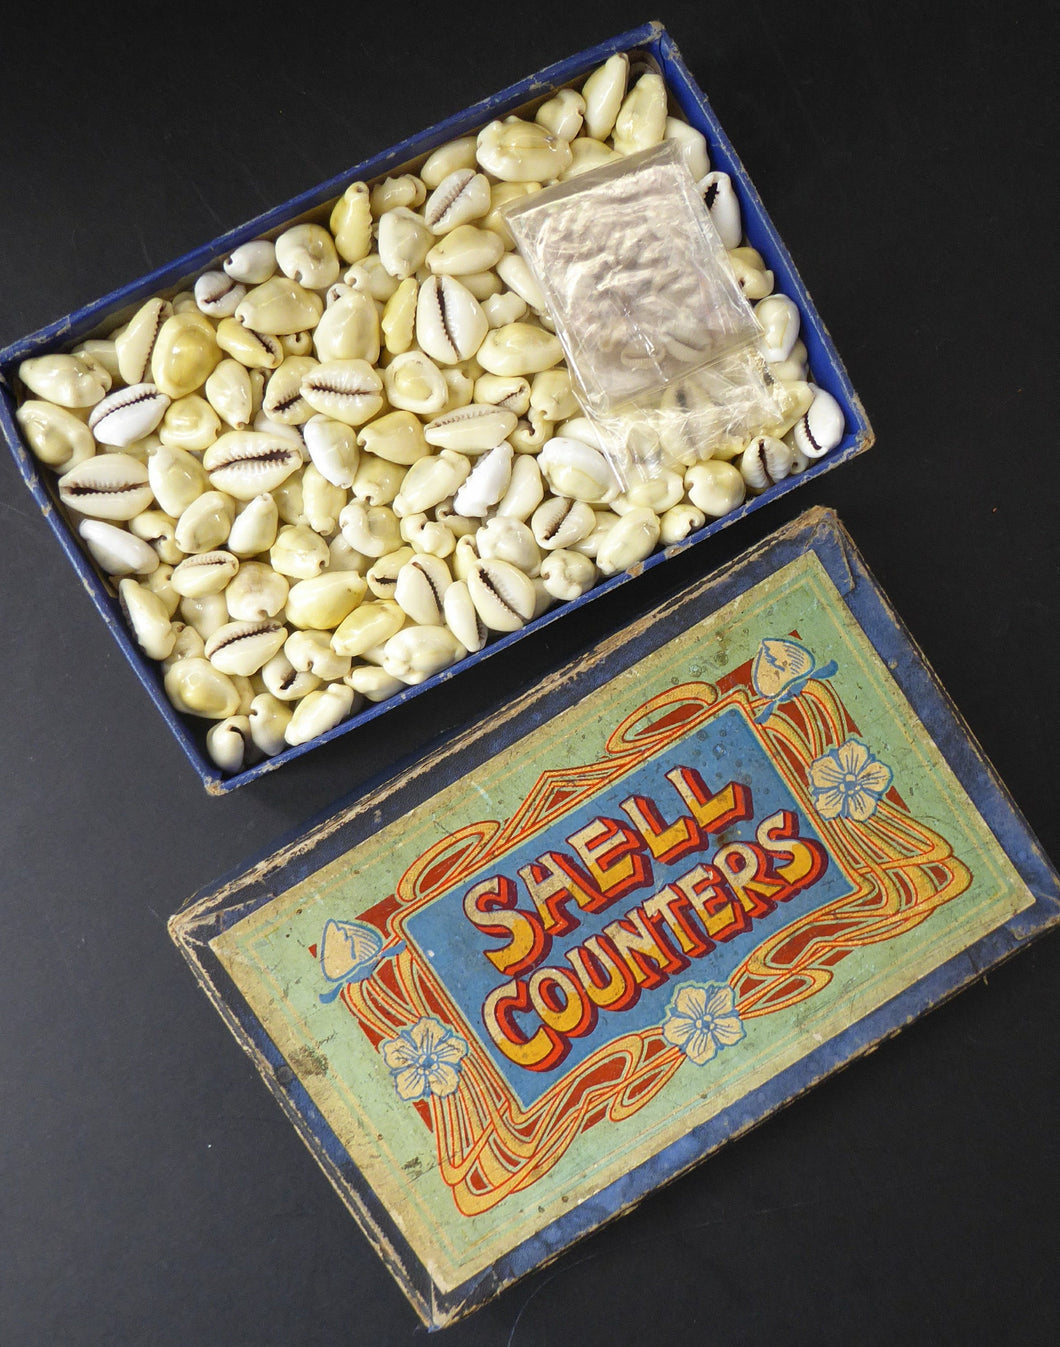 EDWARDIAN GAMES COUNTERS. Rare Art Nouveau Box with Original Shell Games Counters. Extremely Rare Survivor; c 1910